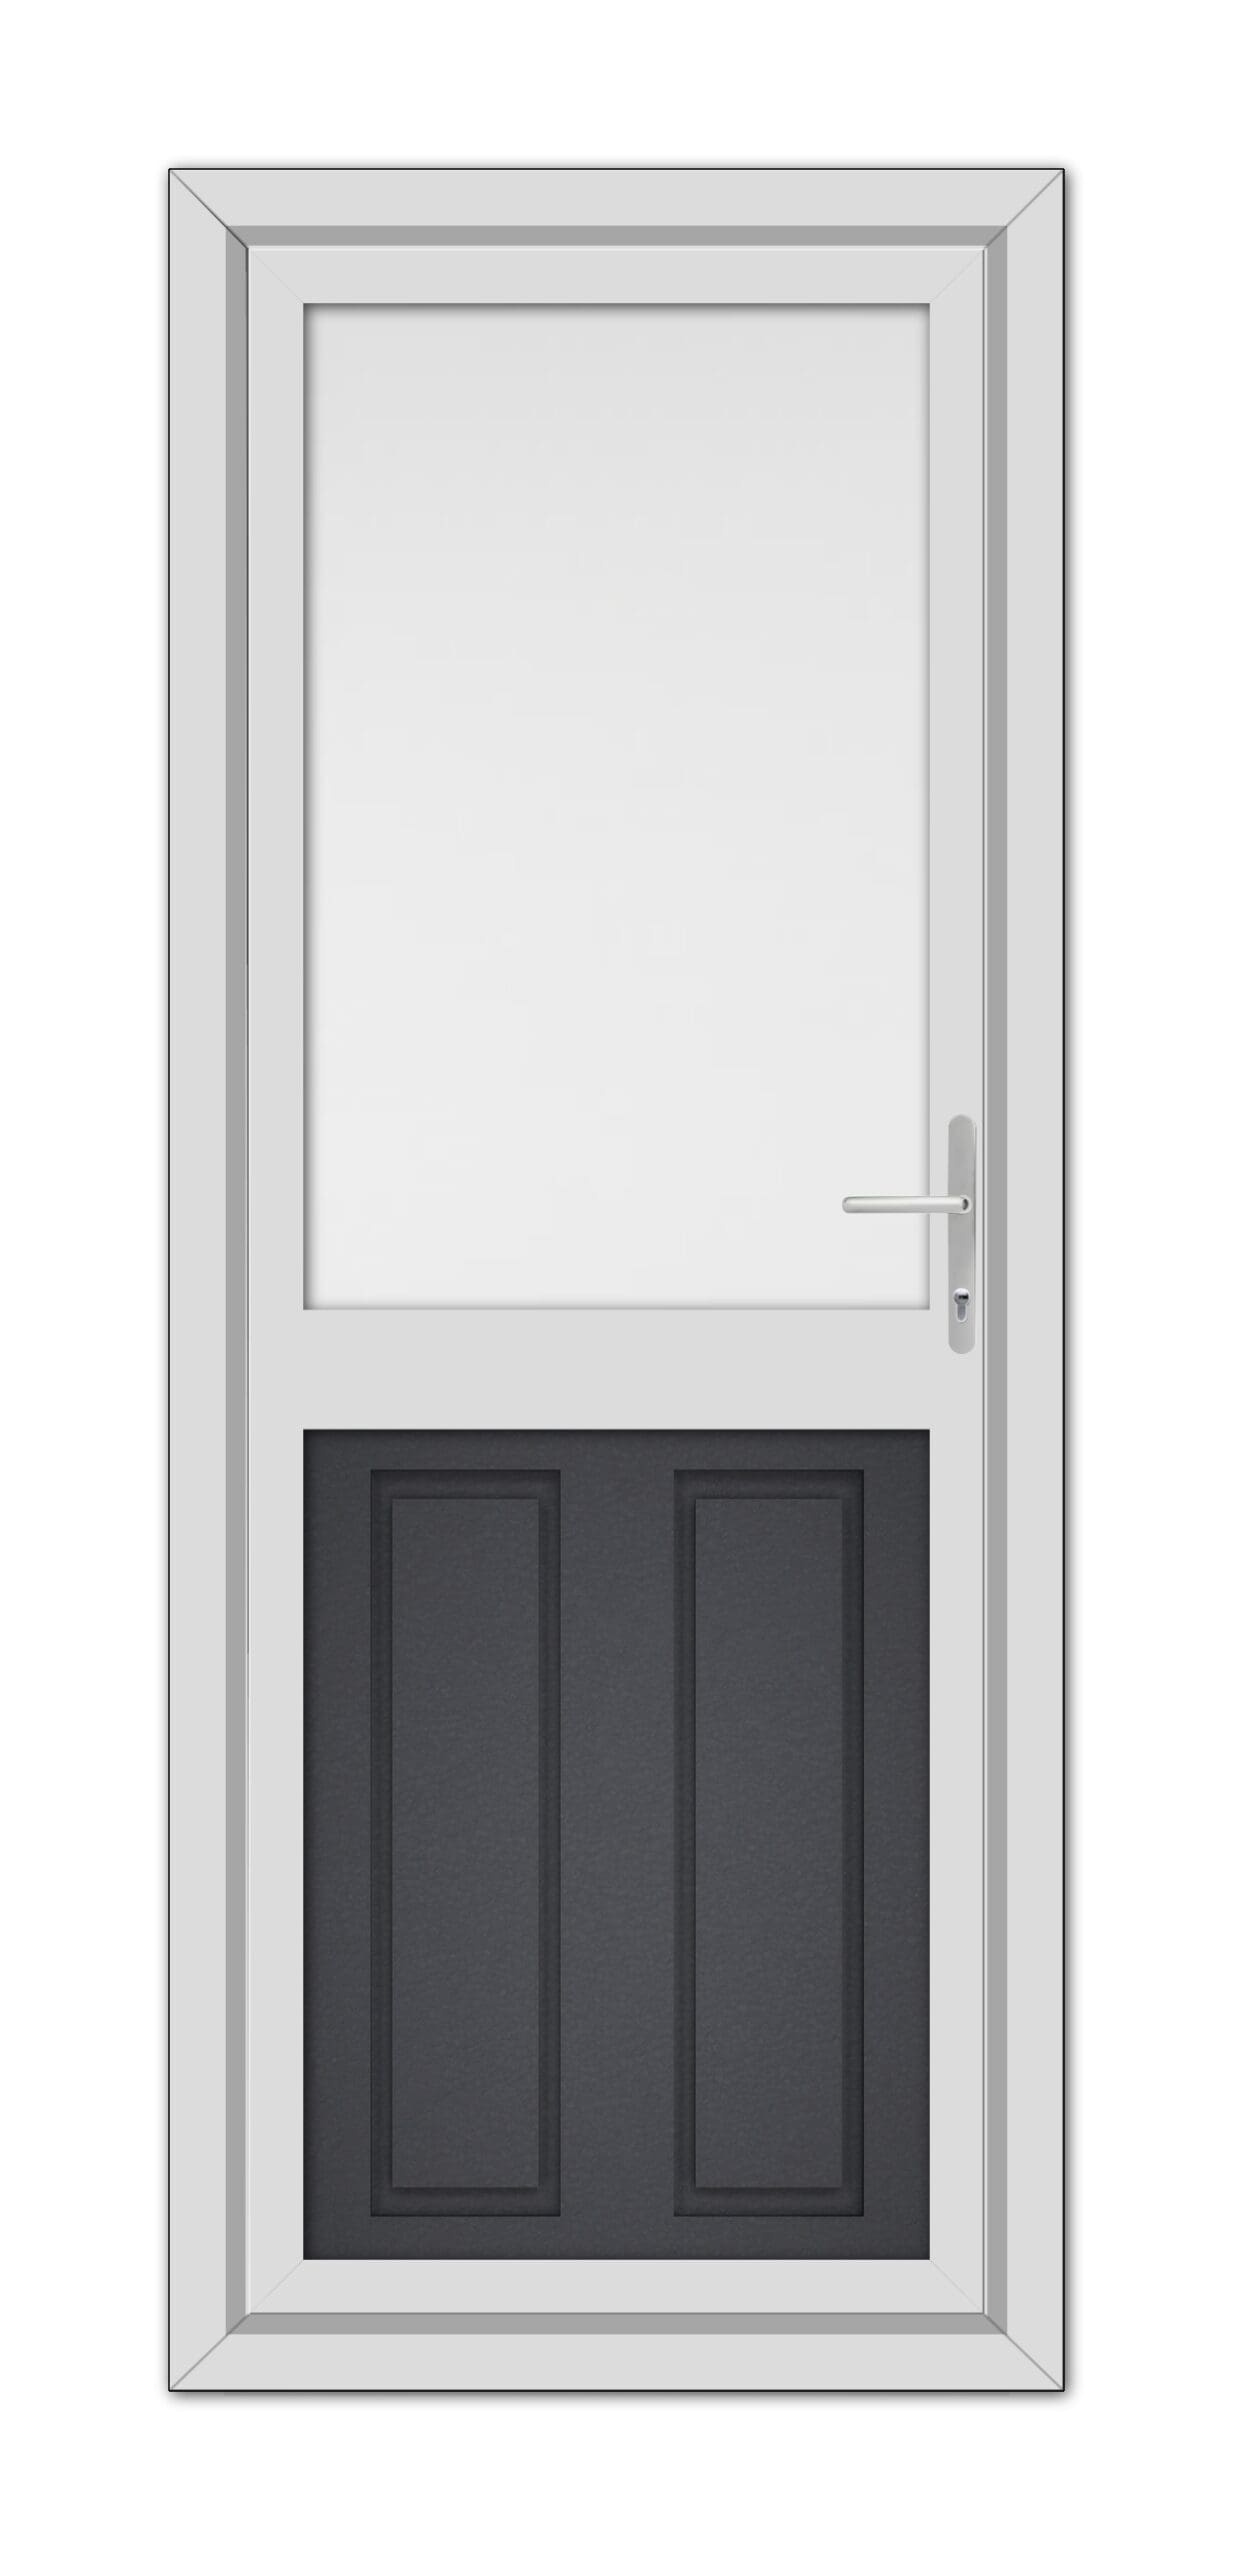 A modern Grey Grained Manor Half uPVC Back Door with a top glass pane and two lower black panels, featuring a metallic handle on the right side.